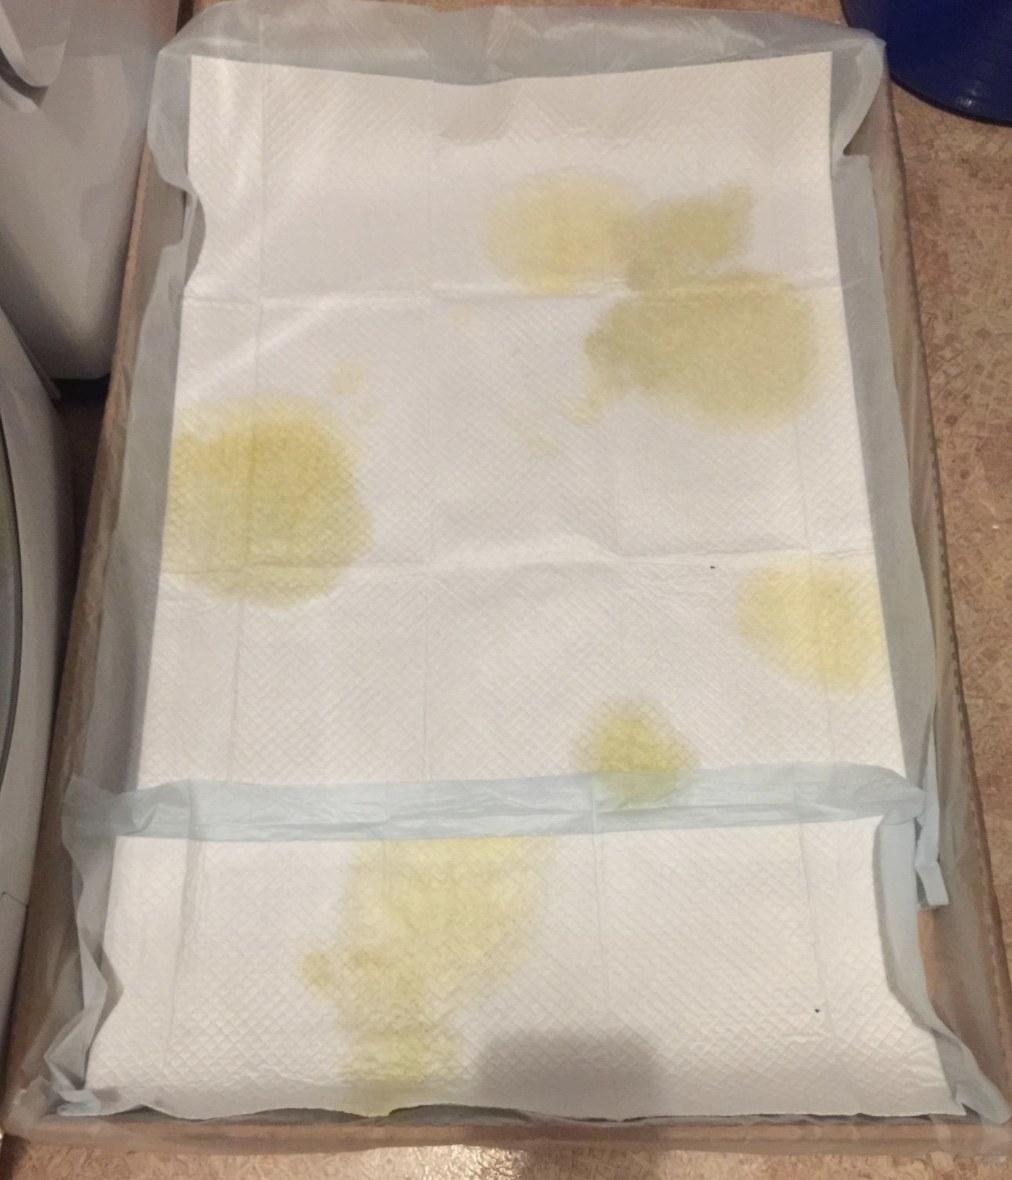 reviewer photo of the pads with pee on it